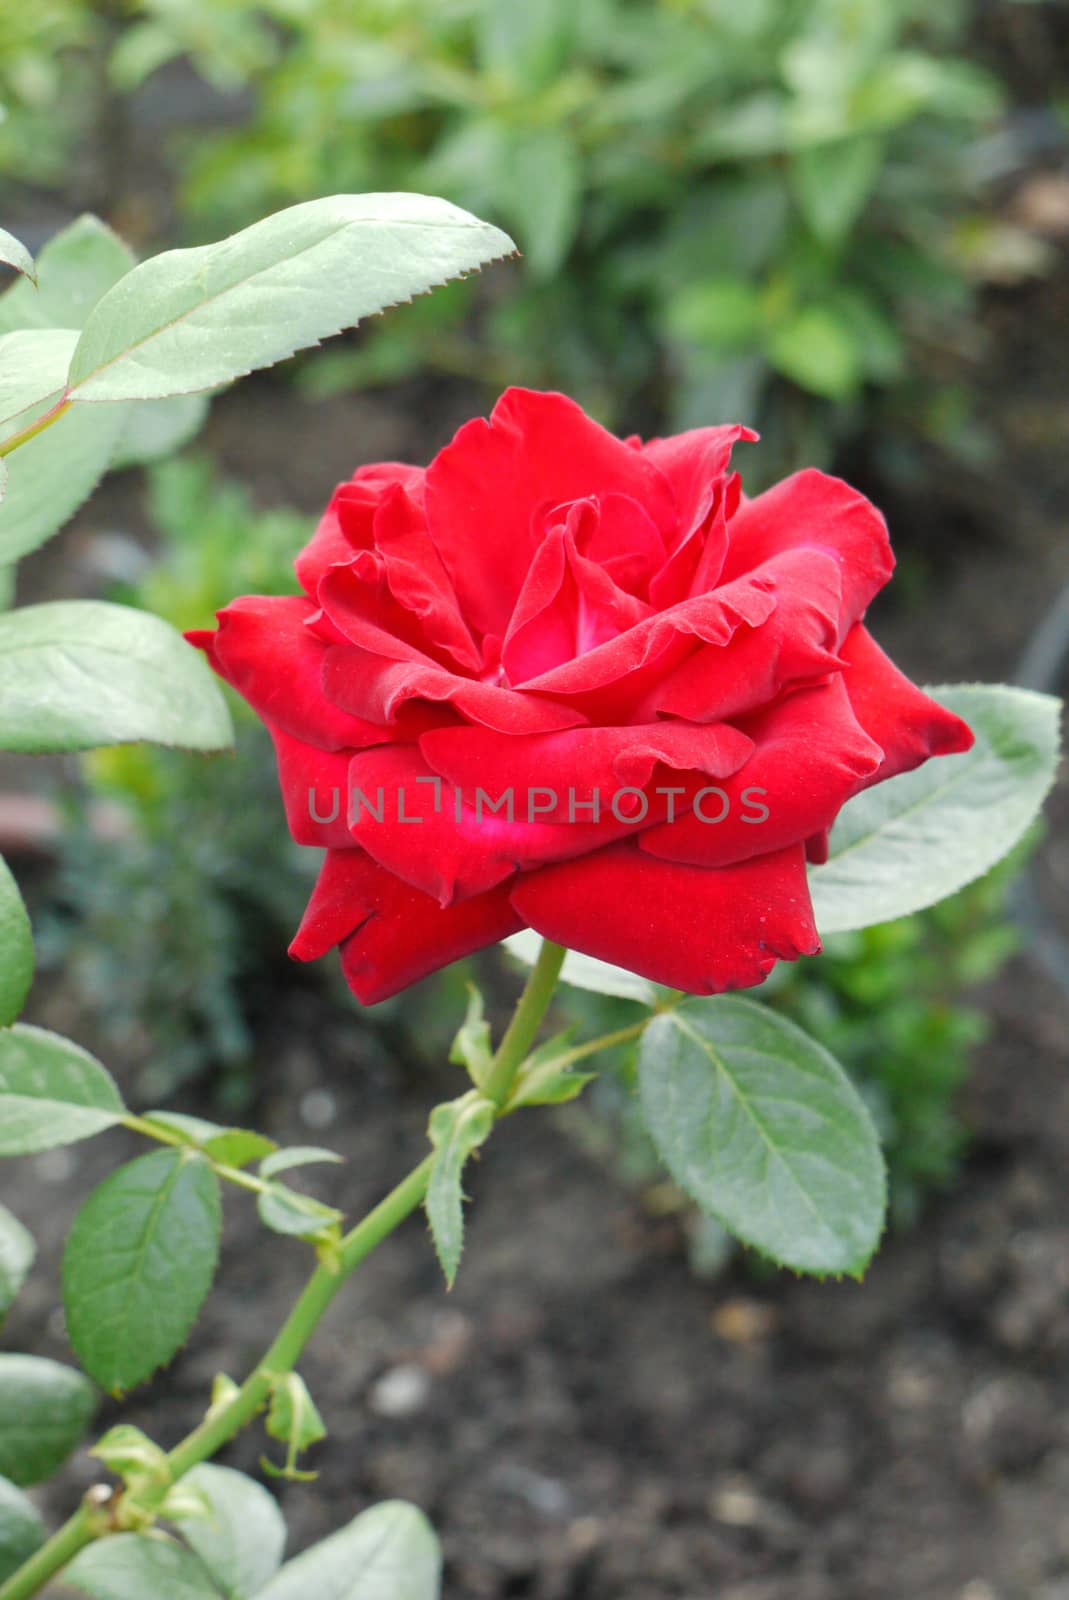 Queen of flowers, beautiful lush red rose on a high stalk with green leaves